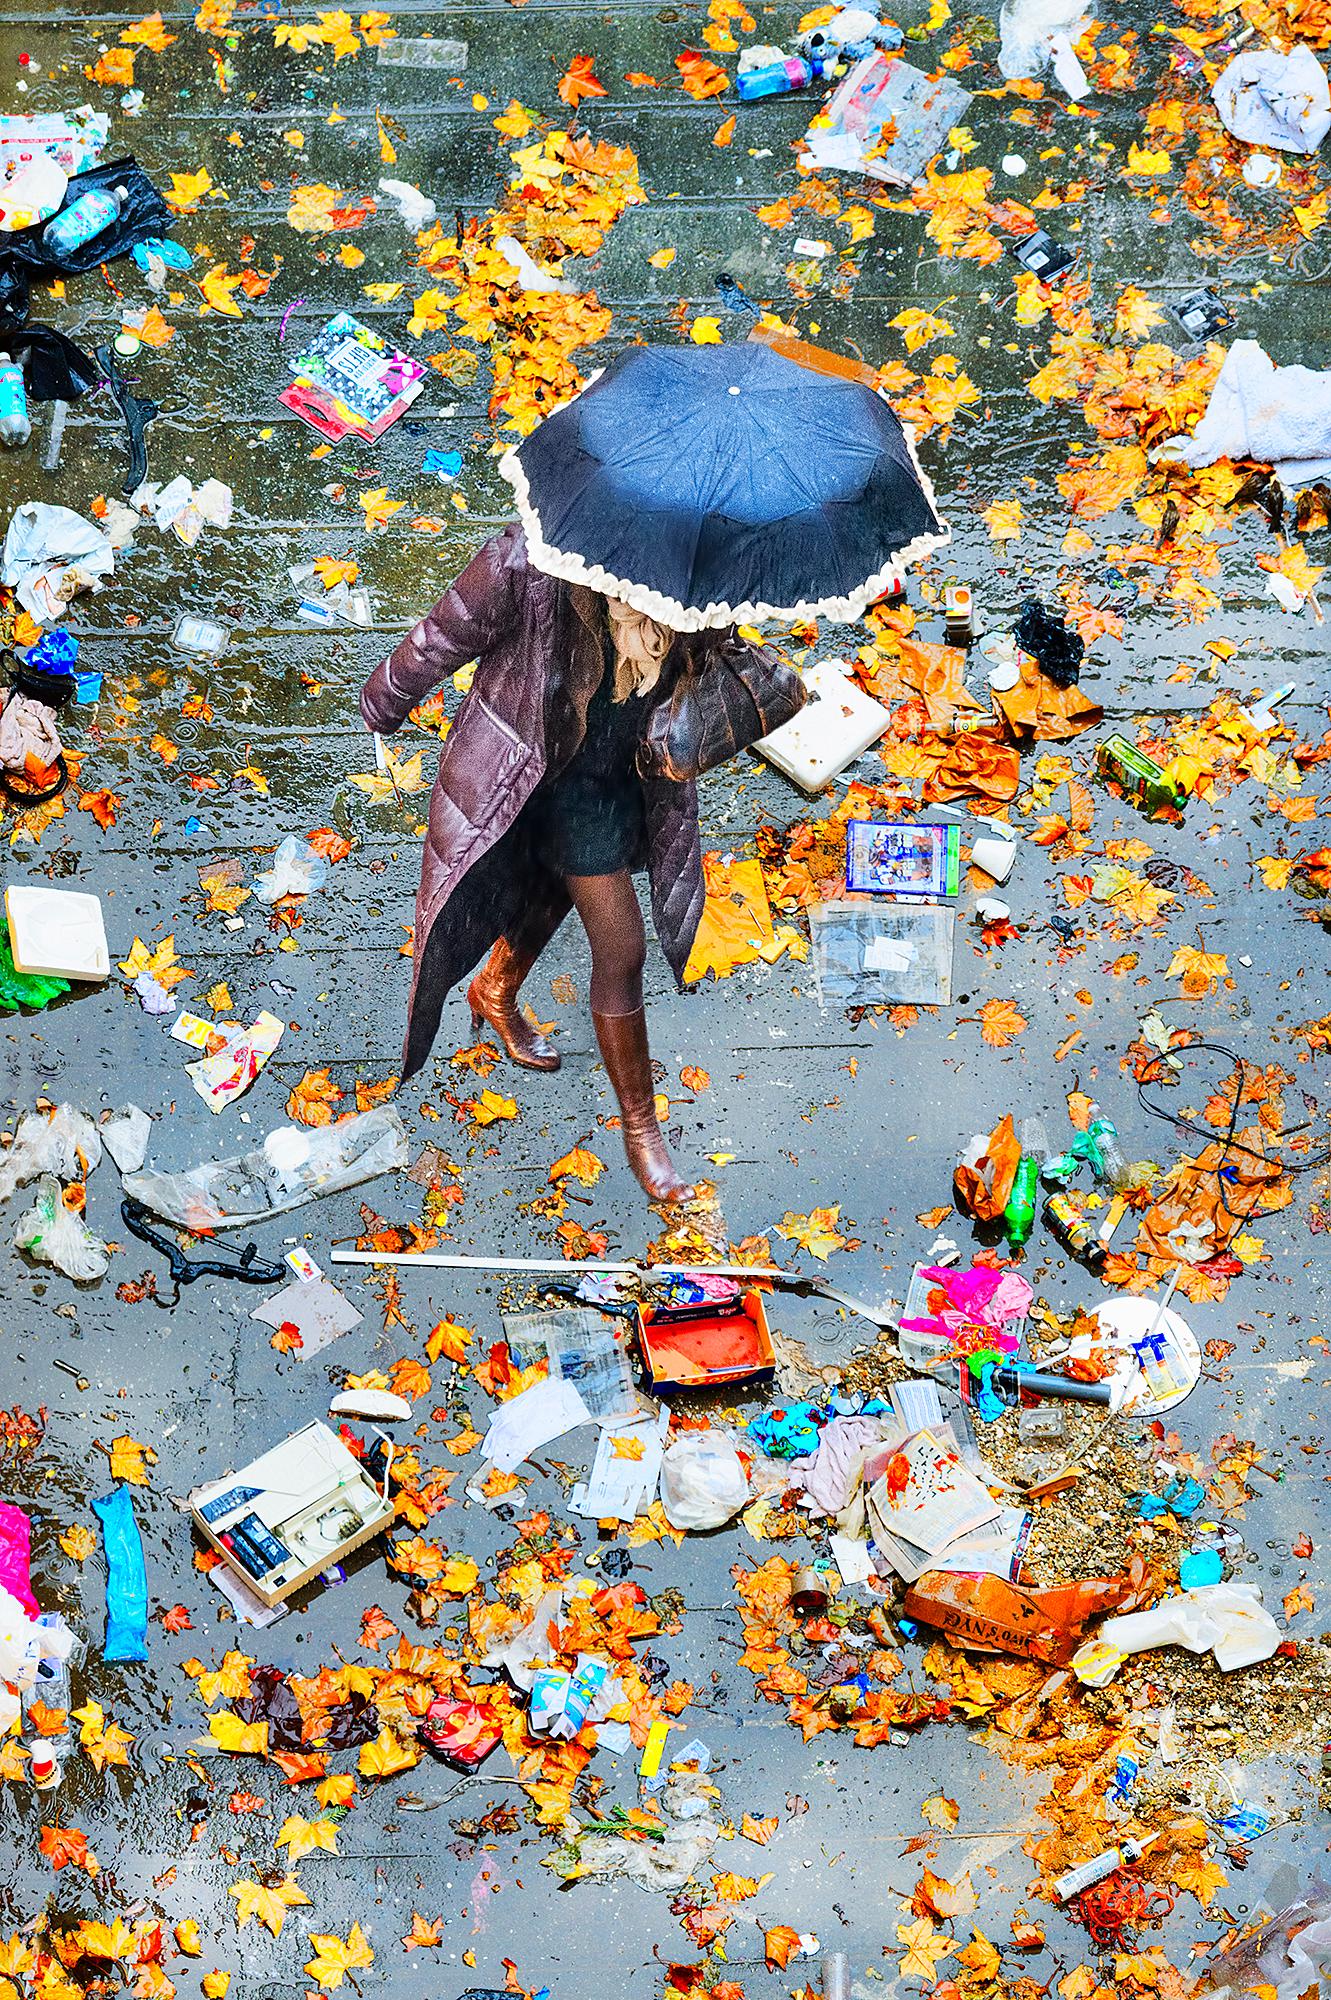 Elevated View Of Women With Umbrella Walking On Scattered Leaves